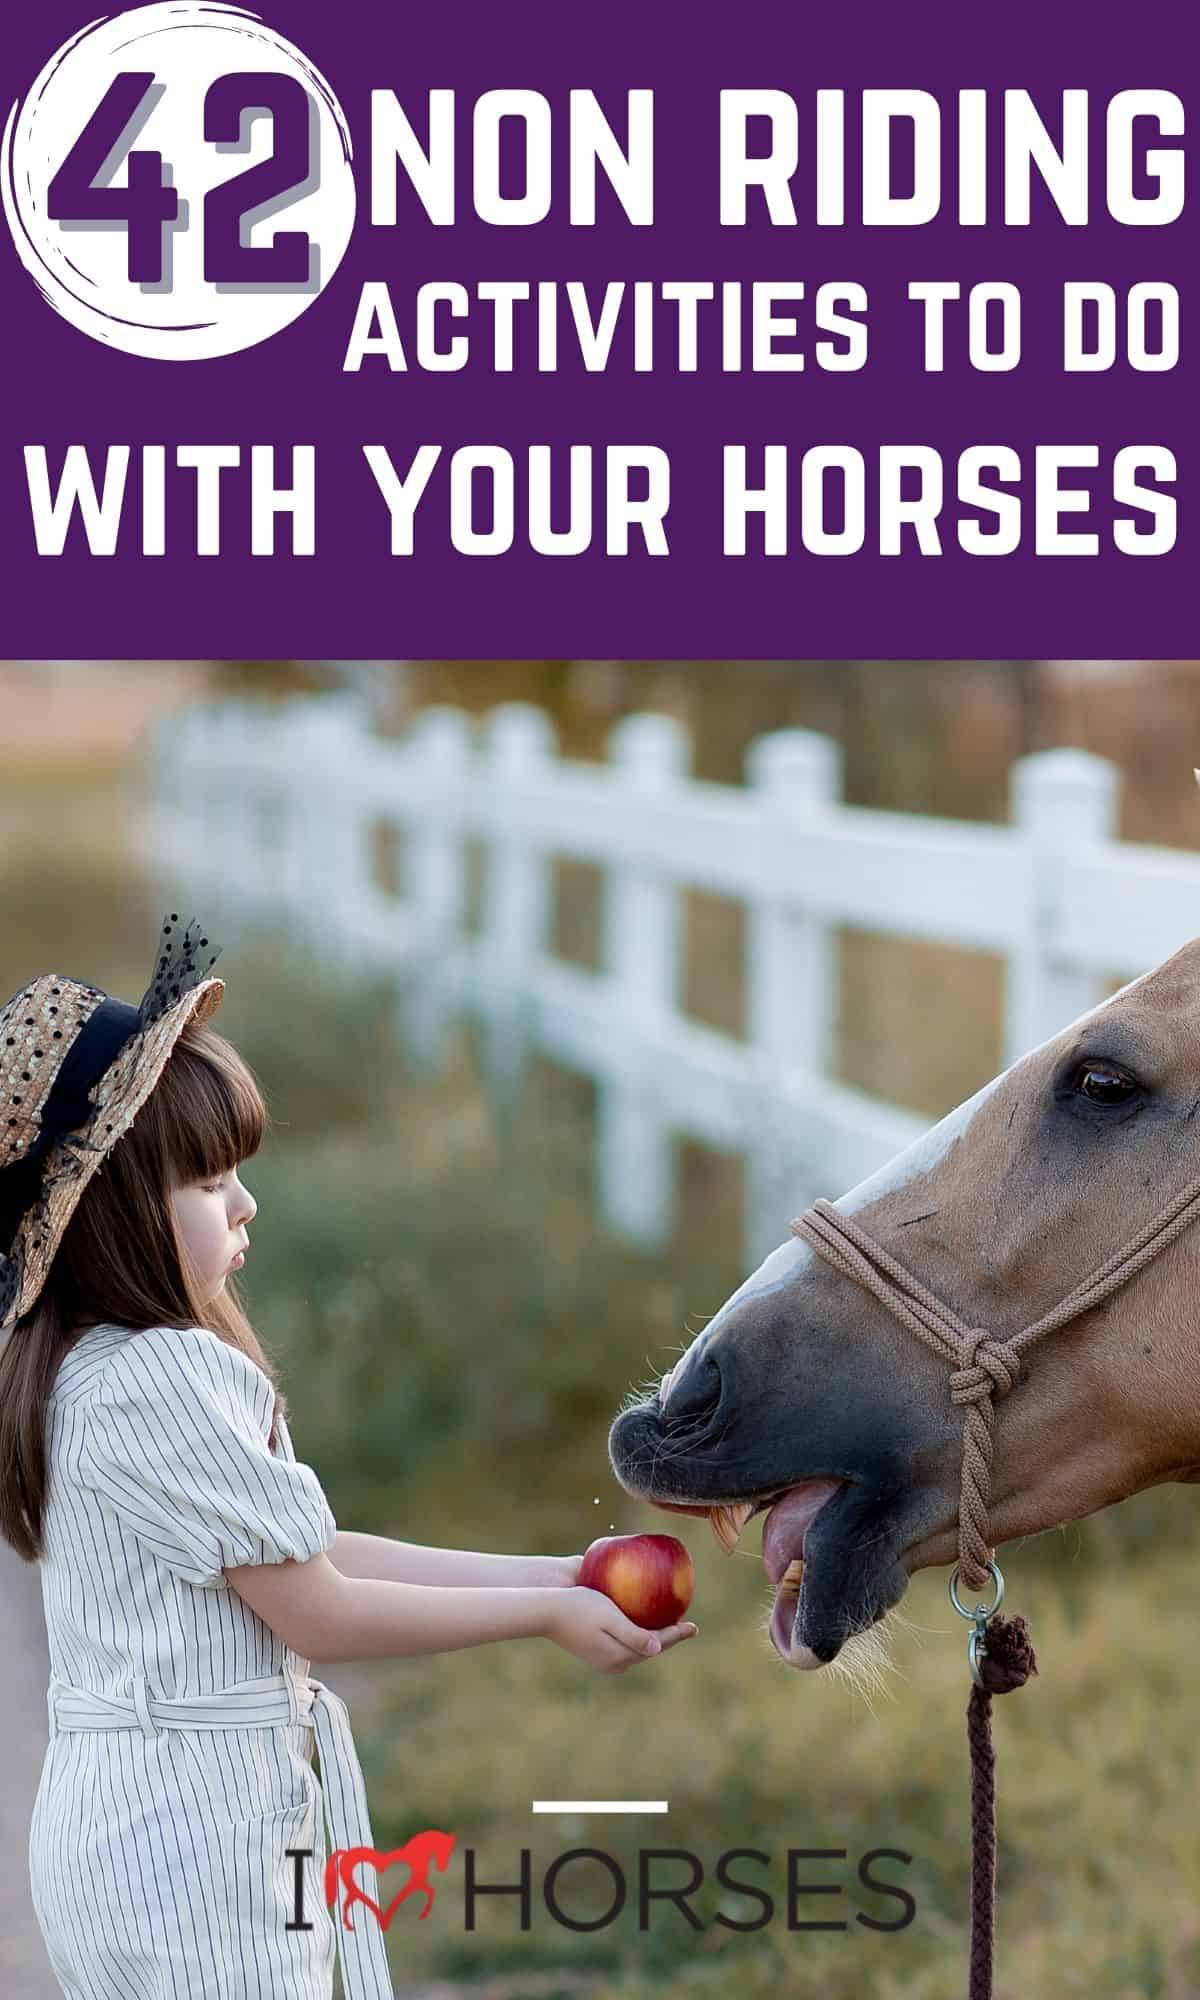 42 Fun Non-Riding Activities to Do With Your Horse